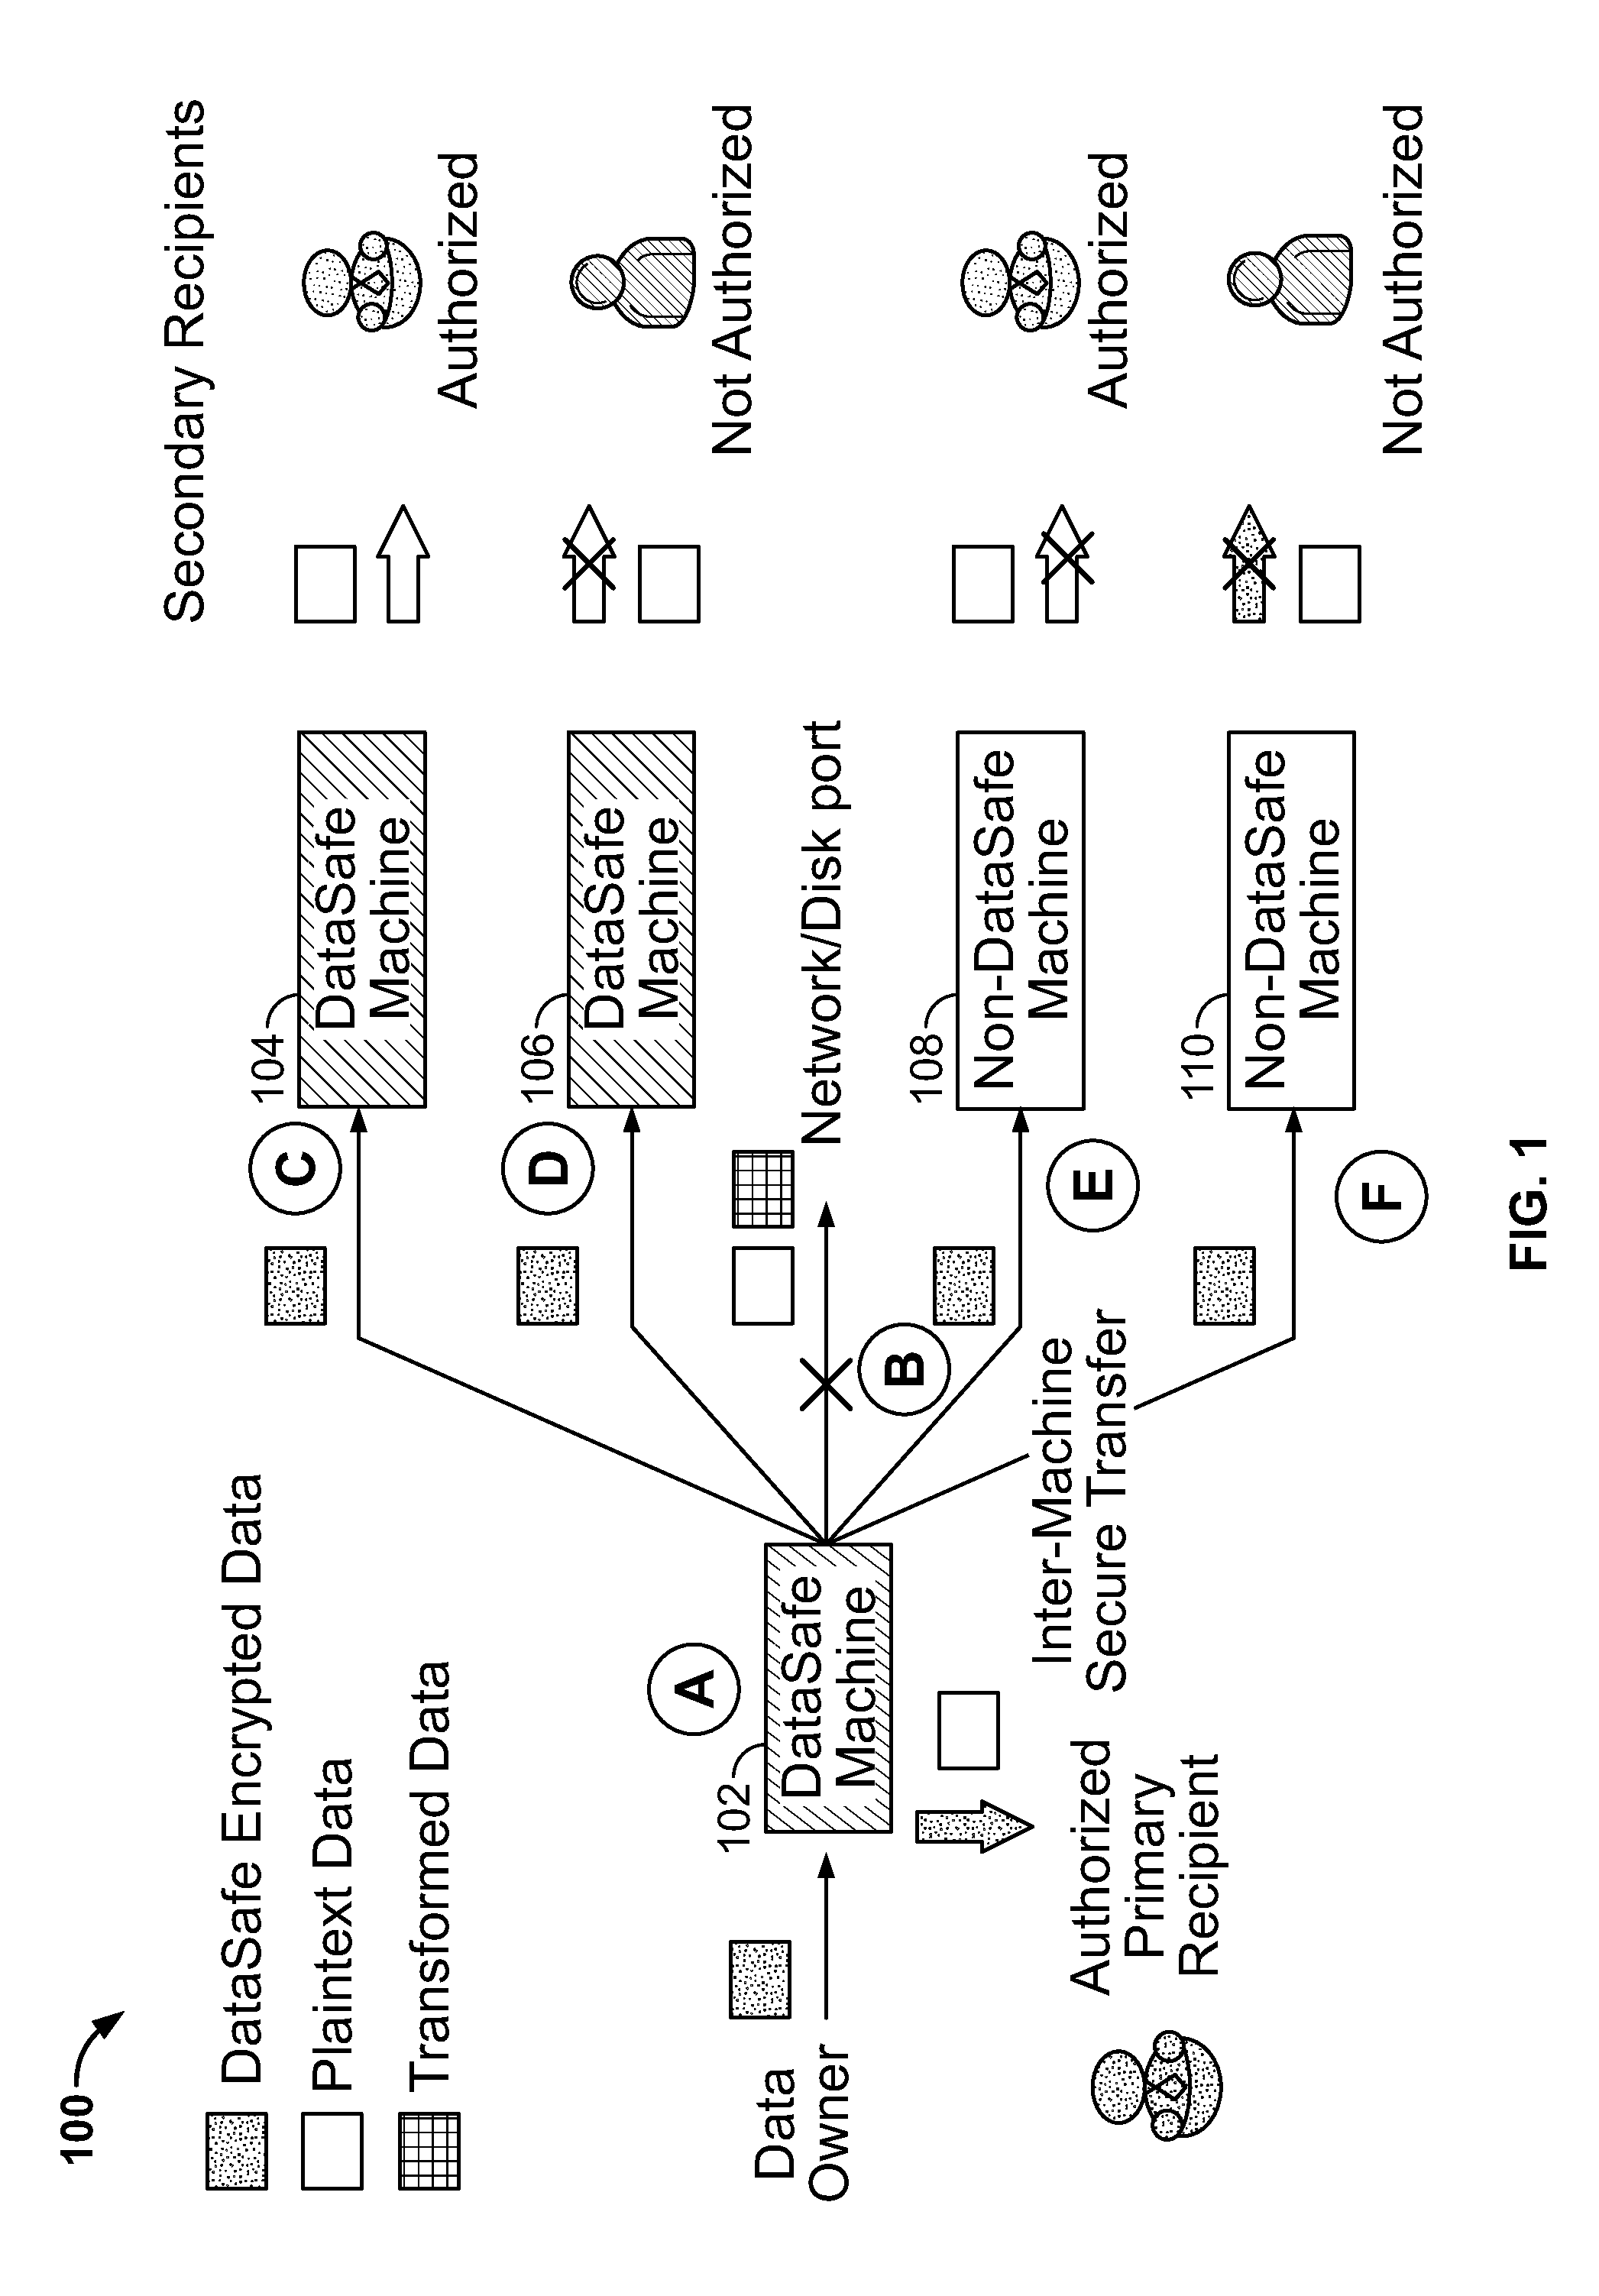 System and Method for Self-Protecting Data